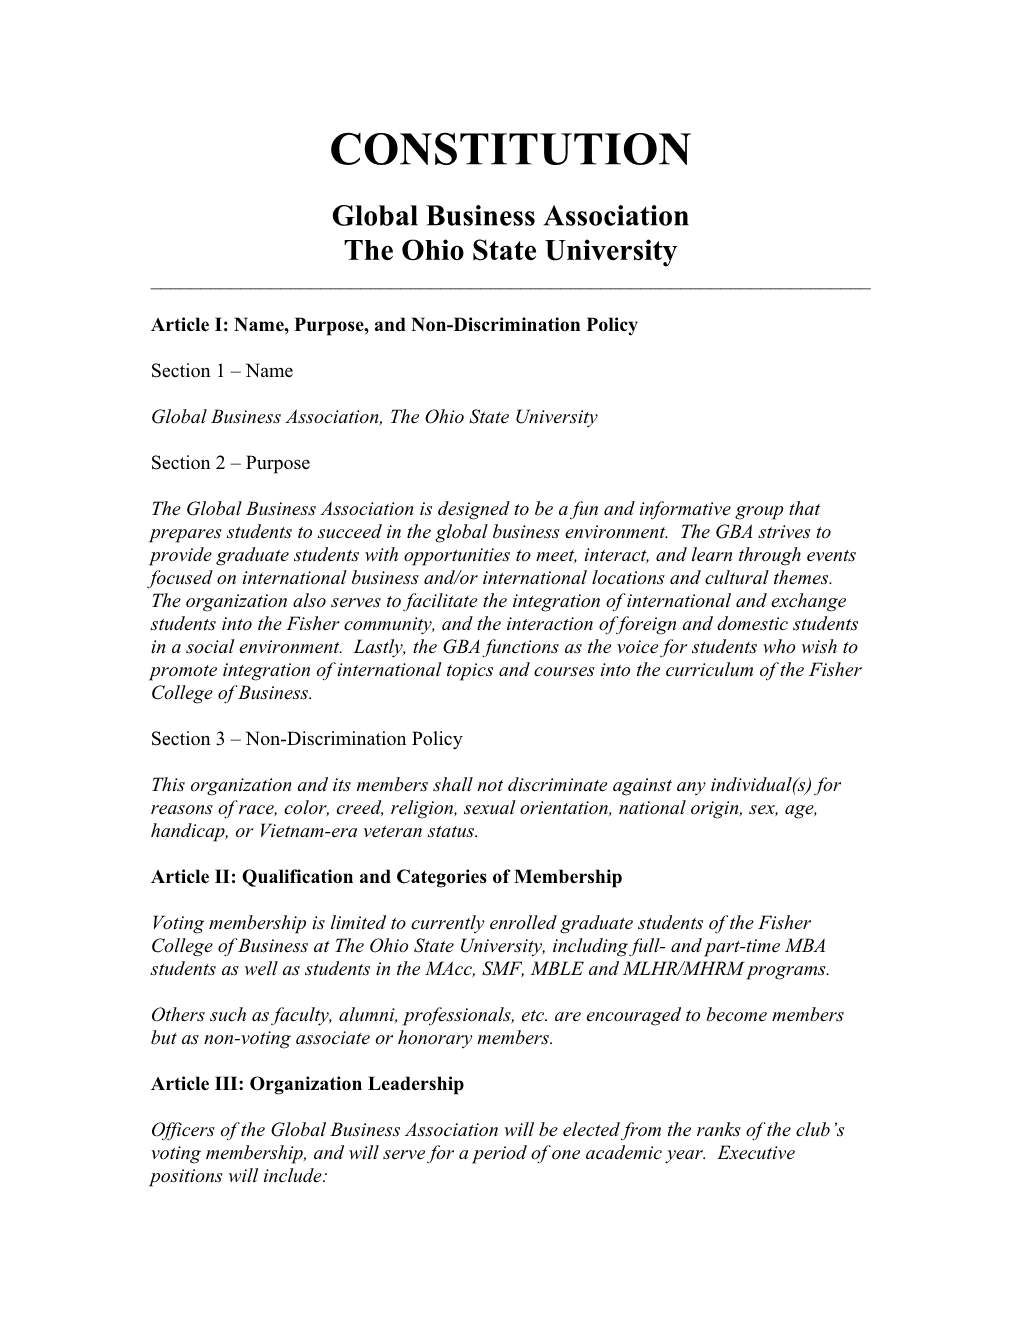 Constitution and By-Laws Guidelines for Student Organizations